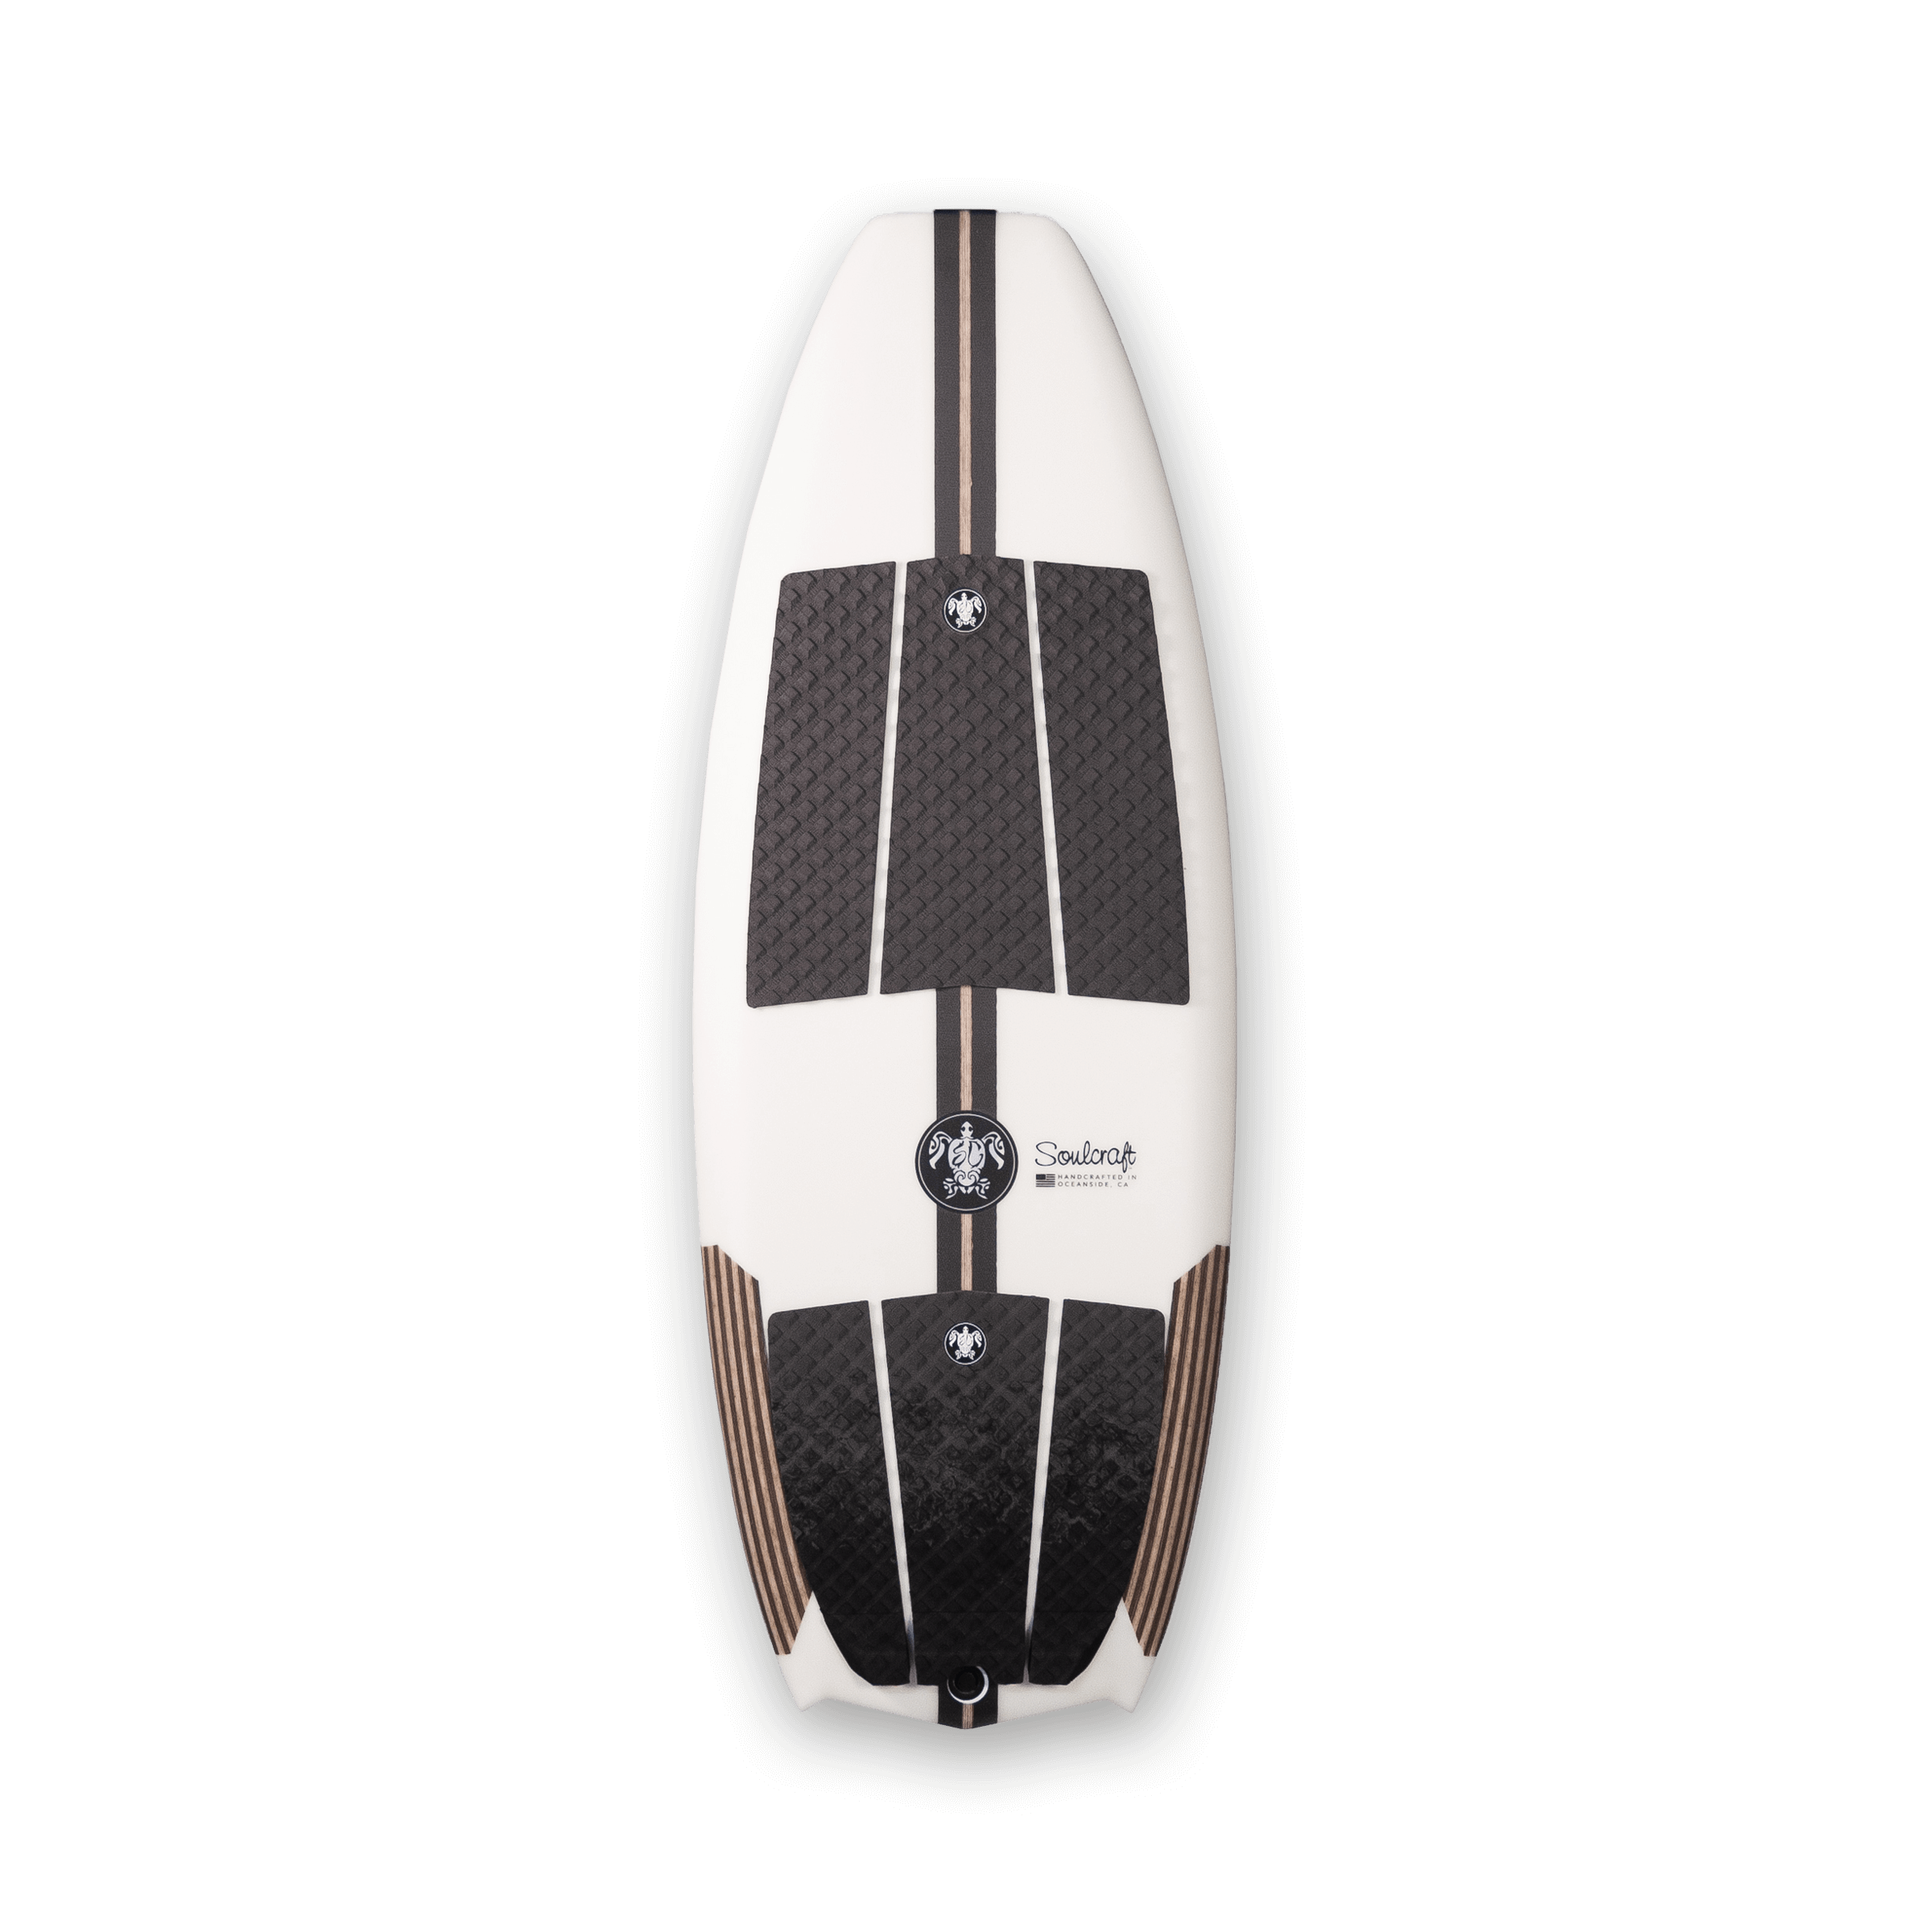 A Soulcraft SuperFang-R Wakesurf Board on a black background made with R-Series carbon fiber.